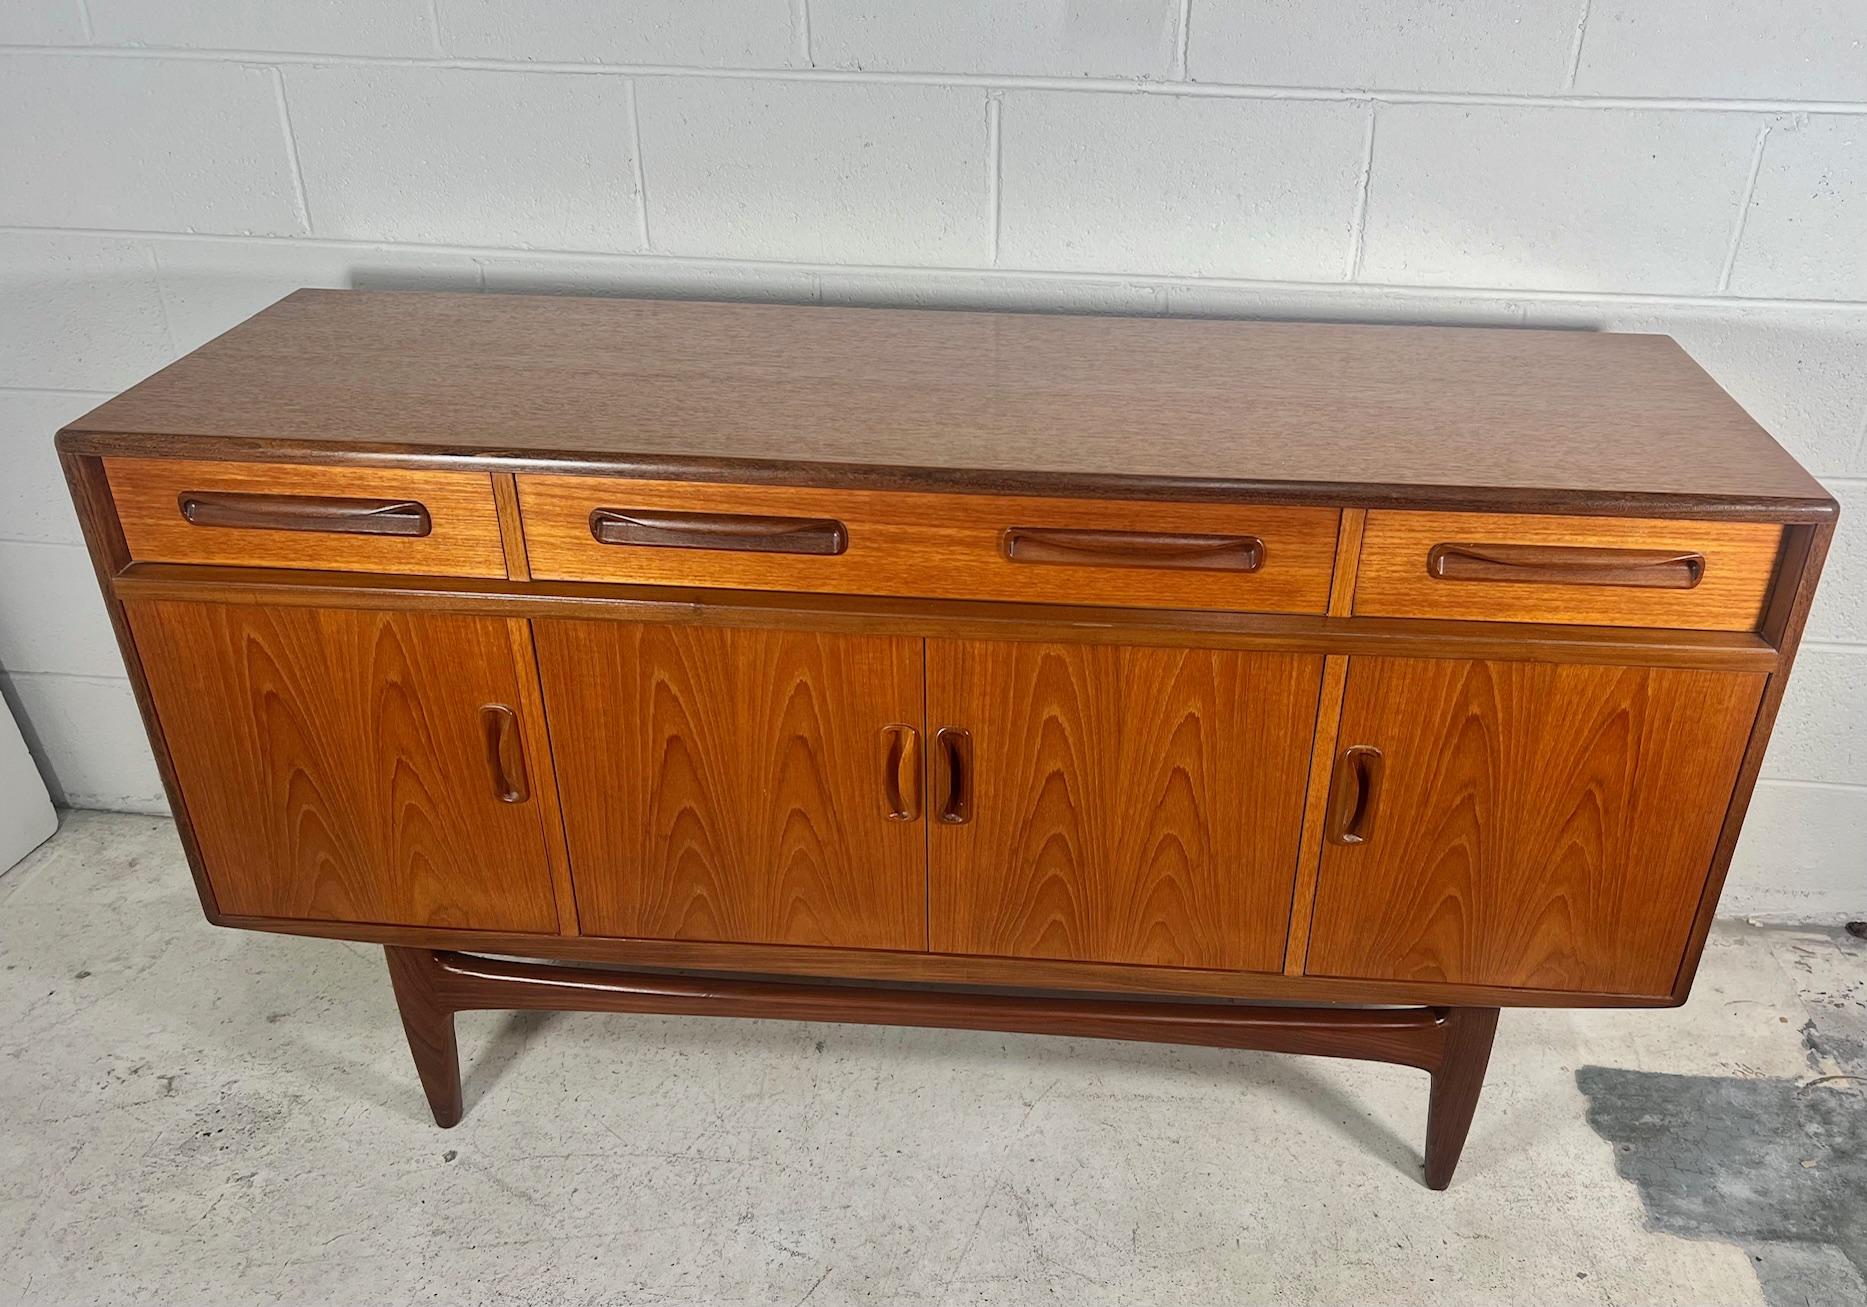 Outstanding small teak credenza. It was designed in the 1960s by Victor Bramwell Wilkins for G Plan's Fresco Range. It has original grey baize and wood dividers in the top drawer. Adjustable shelves inside the cabinets.
The back is unfinished.